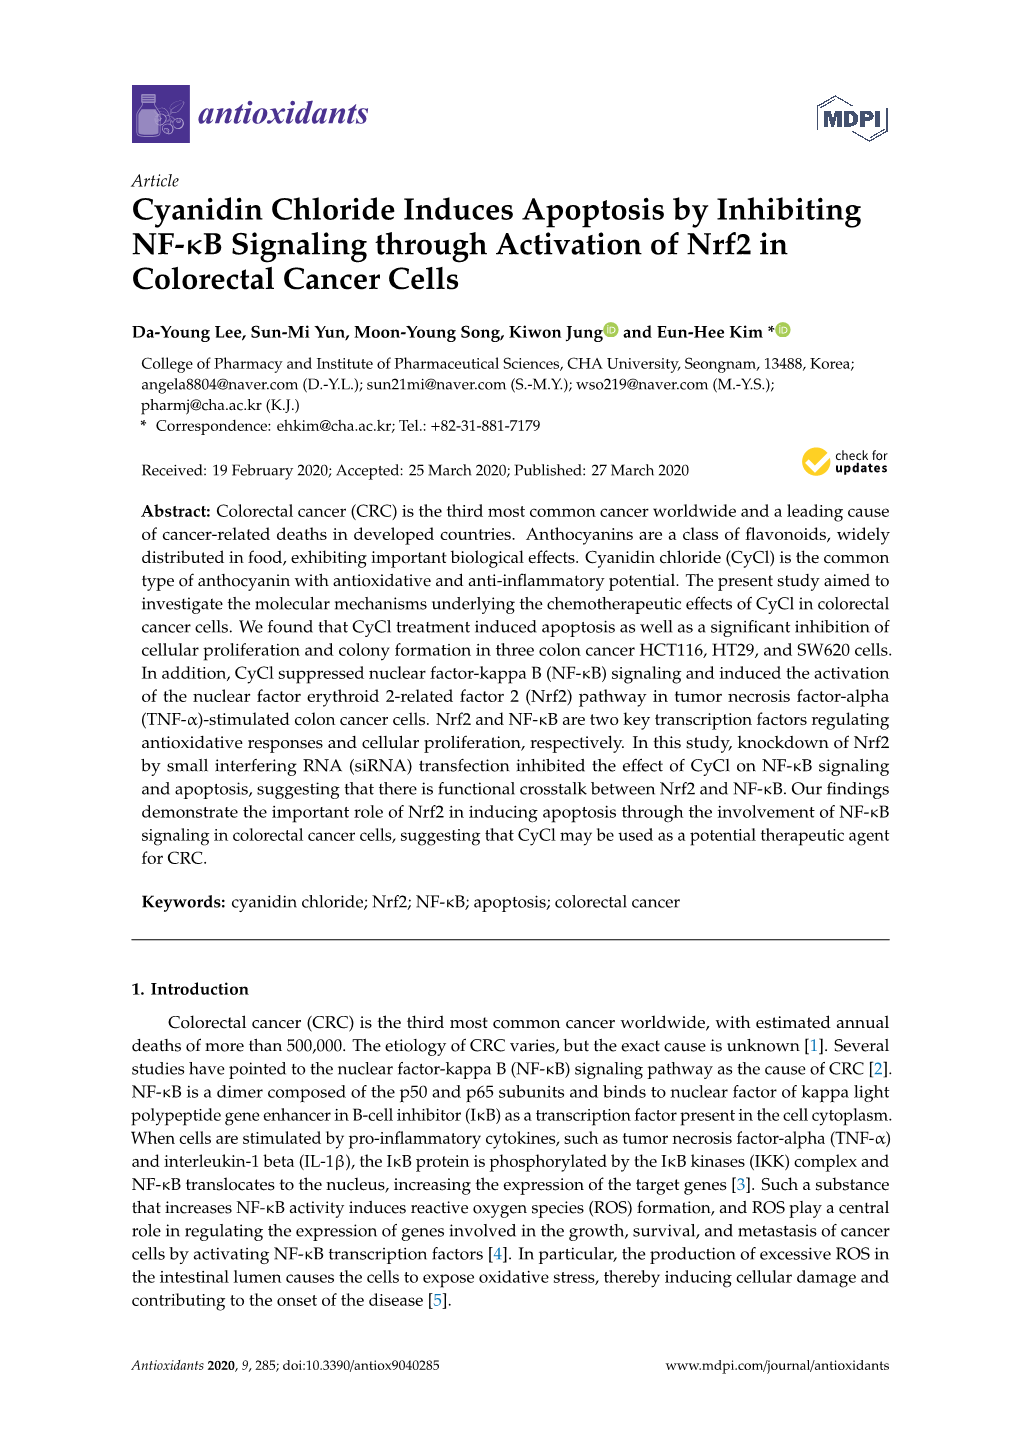 Cyanidin Chloride Induces Apoptosis by Inhibiting NF-Κb Signaling Through Activation of Nrf2 in Colorectal Cancer Cells